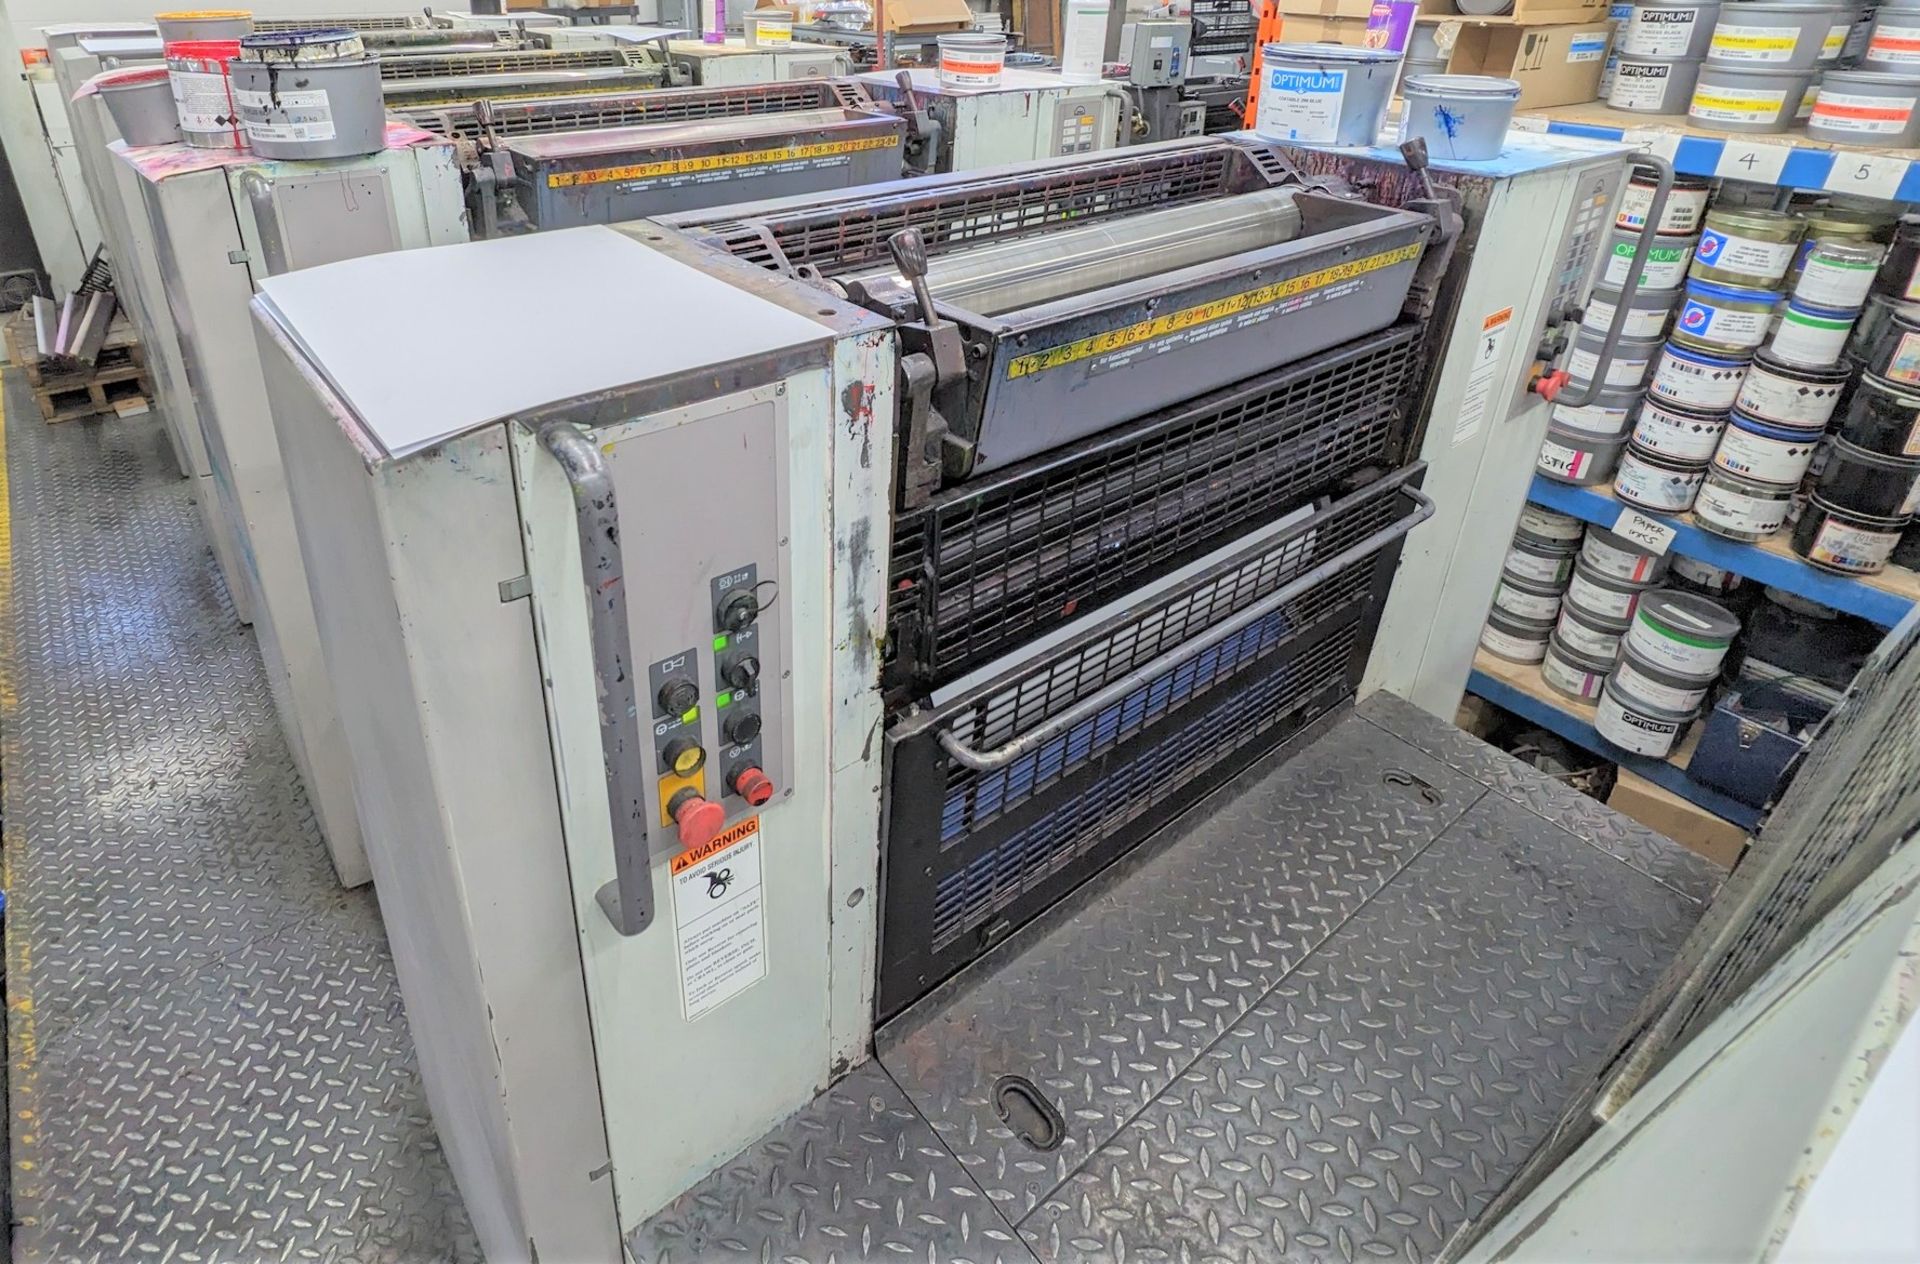 1995 MAN ROLAND 300 6-COLOUR OFFSET PRINTING PRESS, MODEL R306, S/N 25152B, TOTAL SHEET COUNT - Image 12 of 53